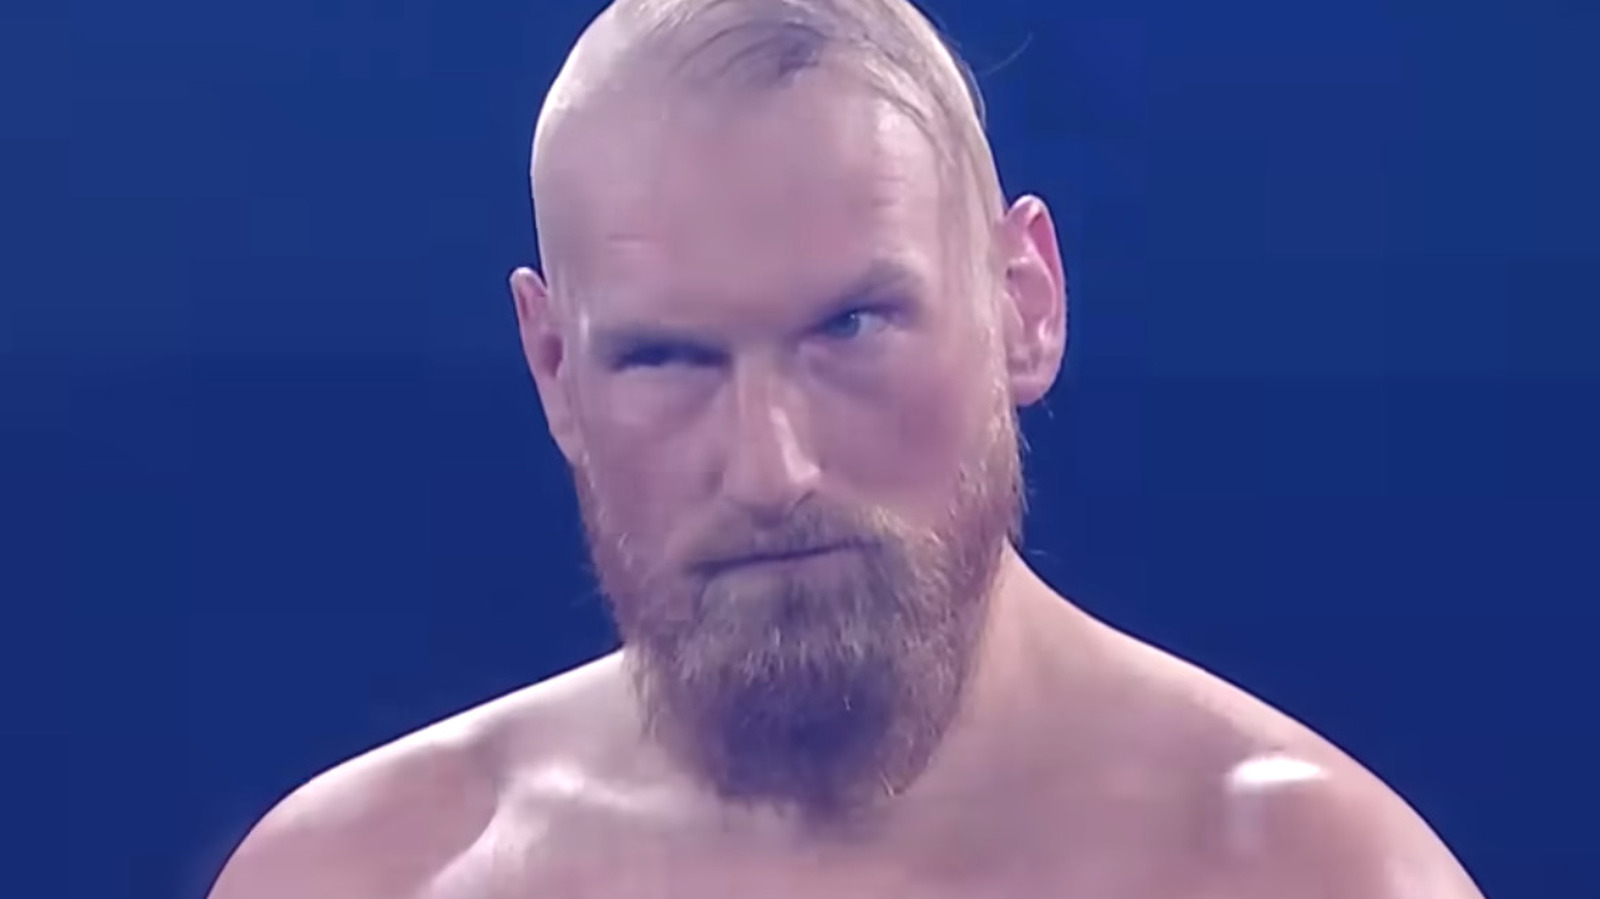 Alexander Wolfe Agrees Aspect Of Sanity's WWE Main Roster Run Was Confusing